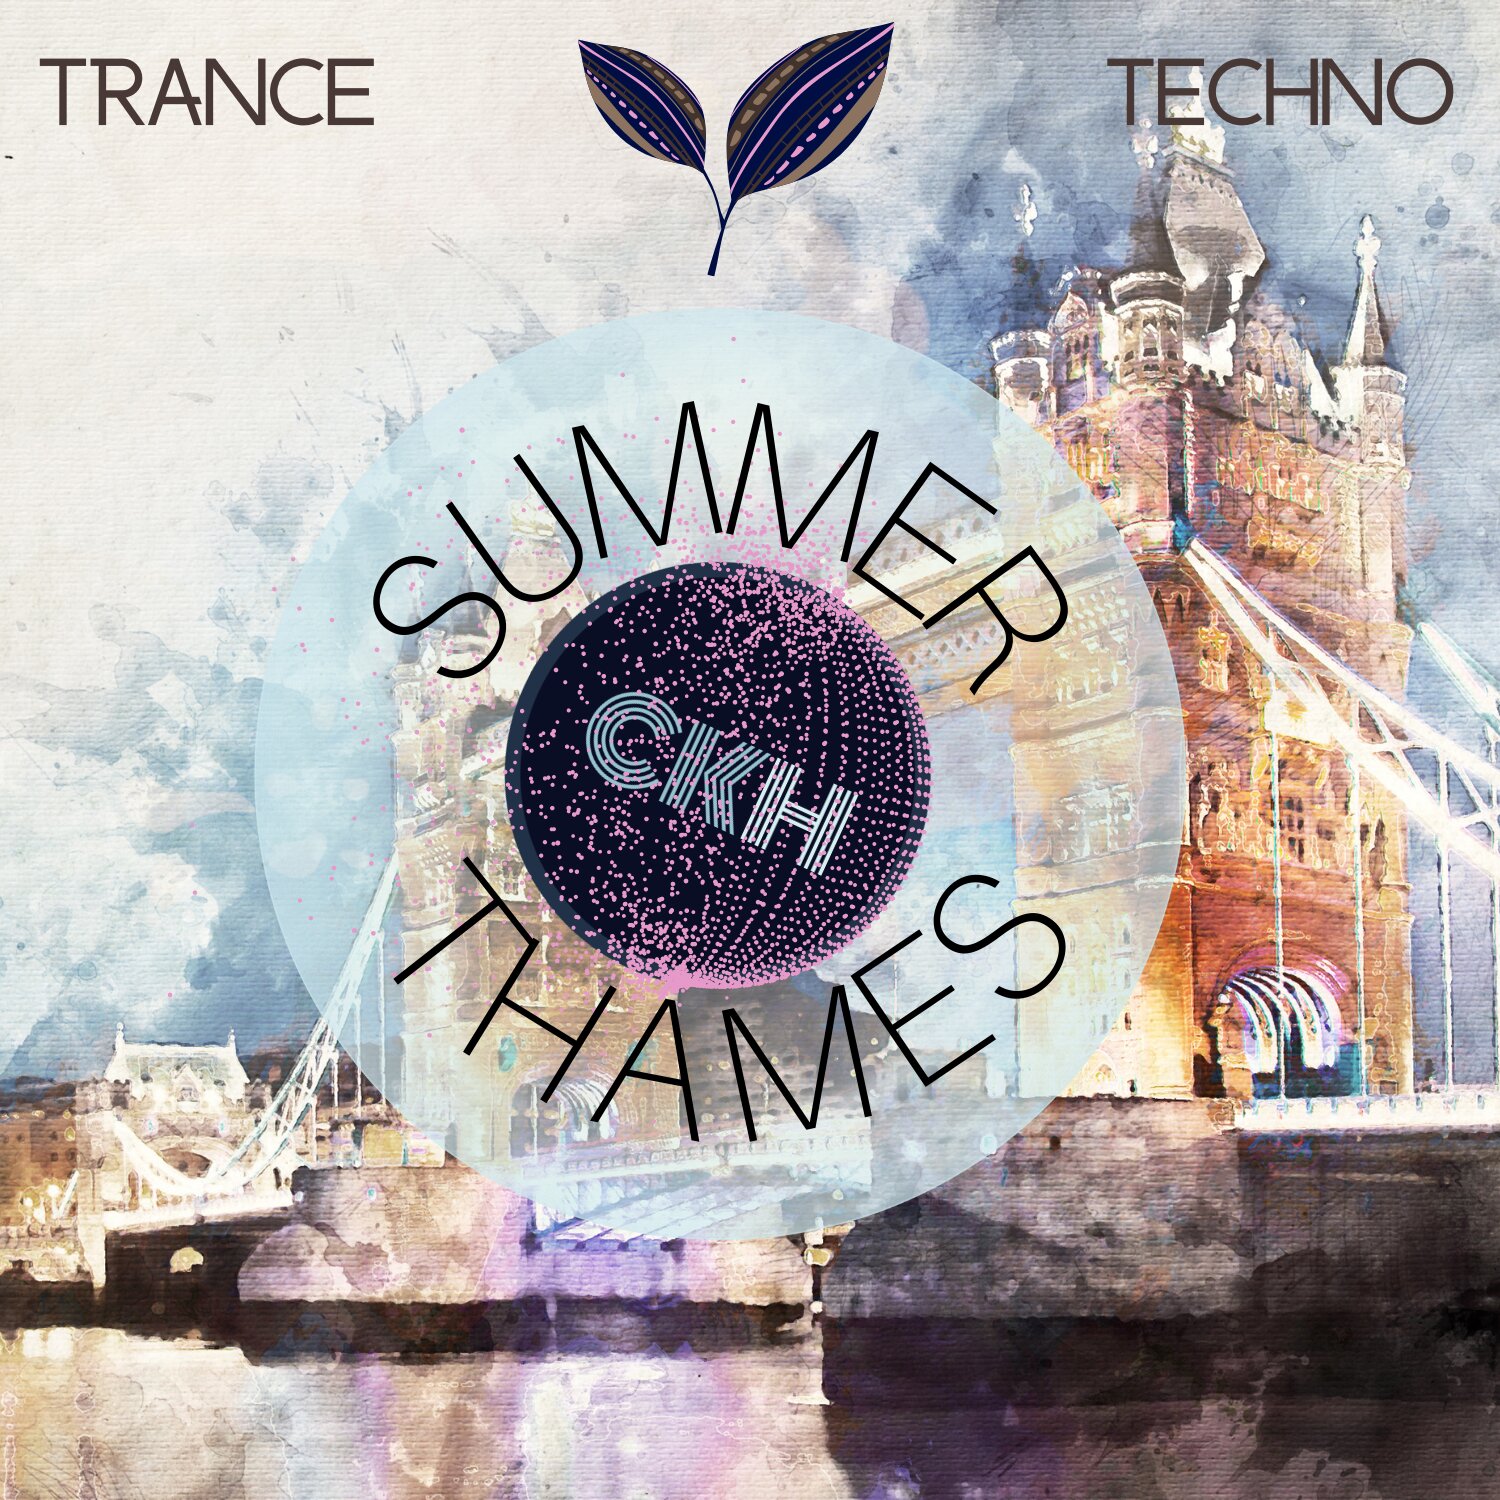 With more than 2 million listeners worldwide, CHK continue their rising assault on the EDM world with hot new DJ set ‘Summer Thames’.